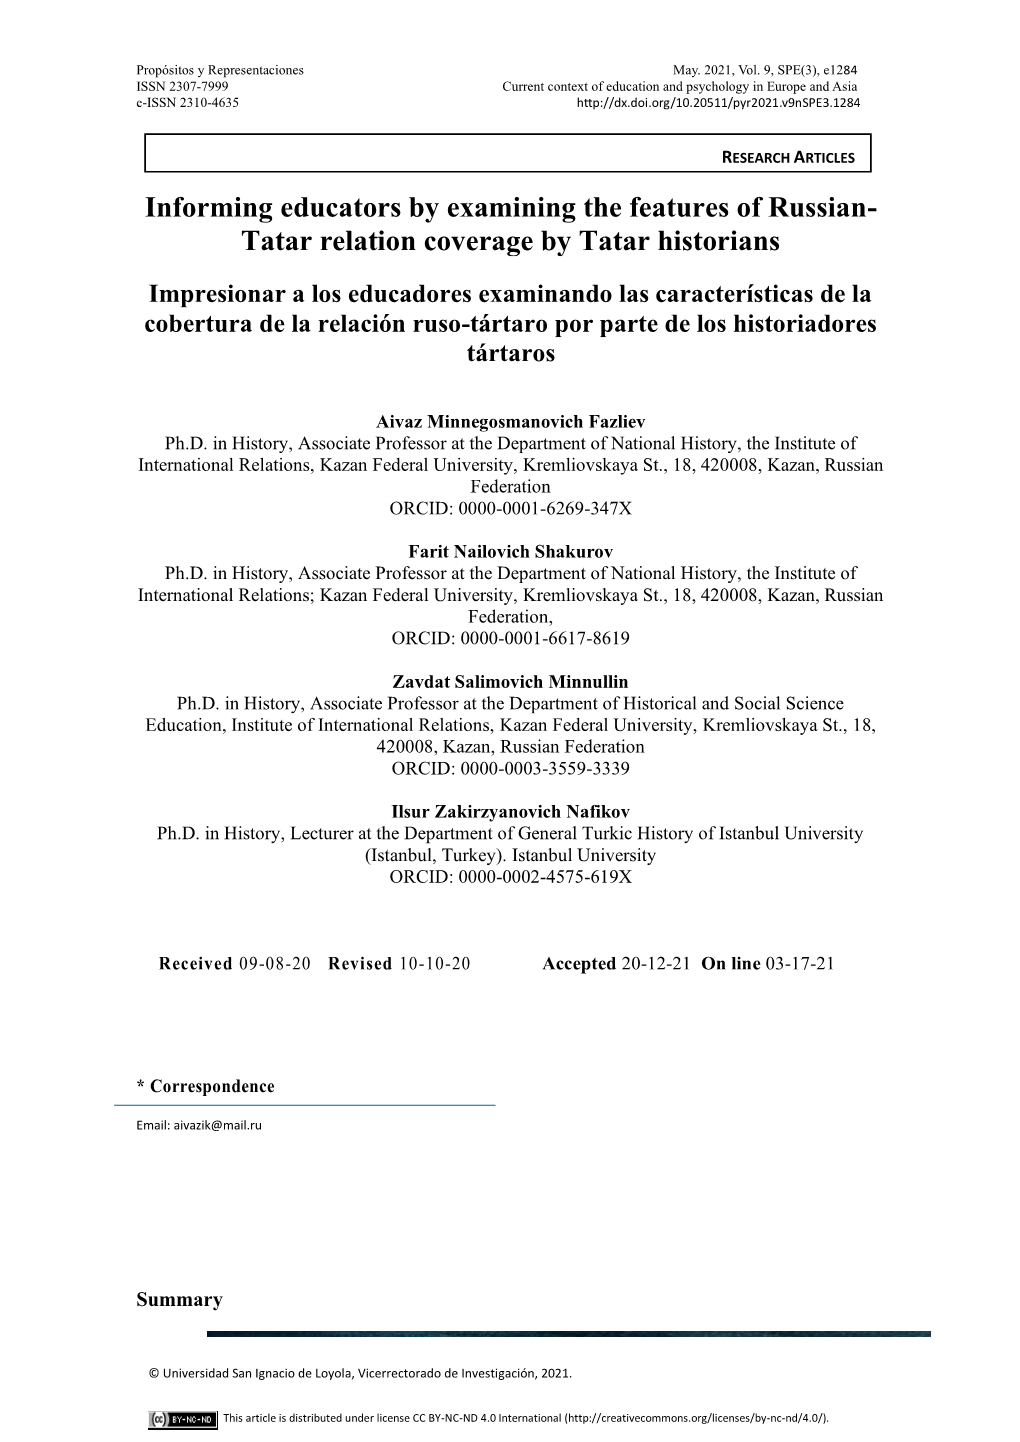 Tatar Relation Coverage by Tatar Historians